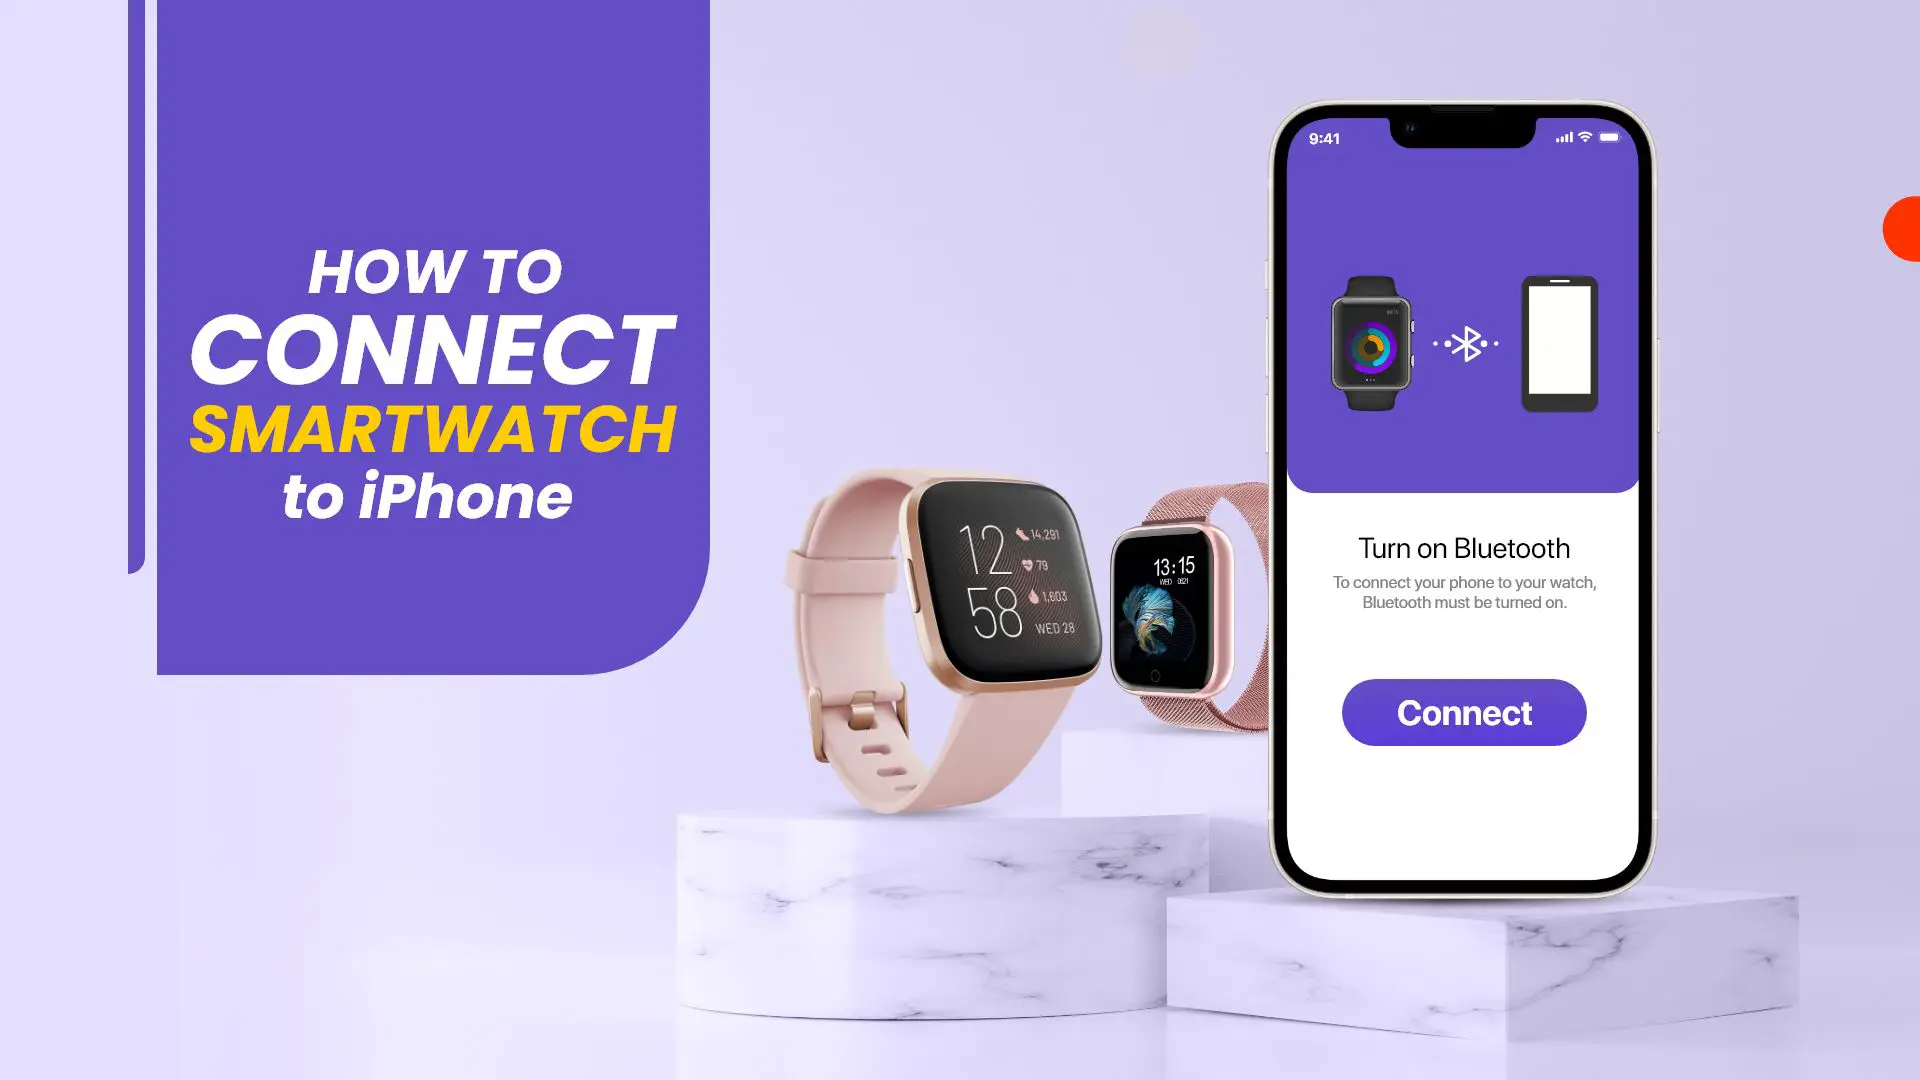 How to Connect Smartwatch to iPhone